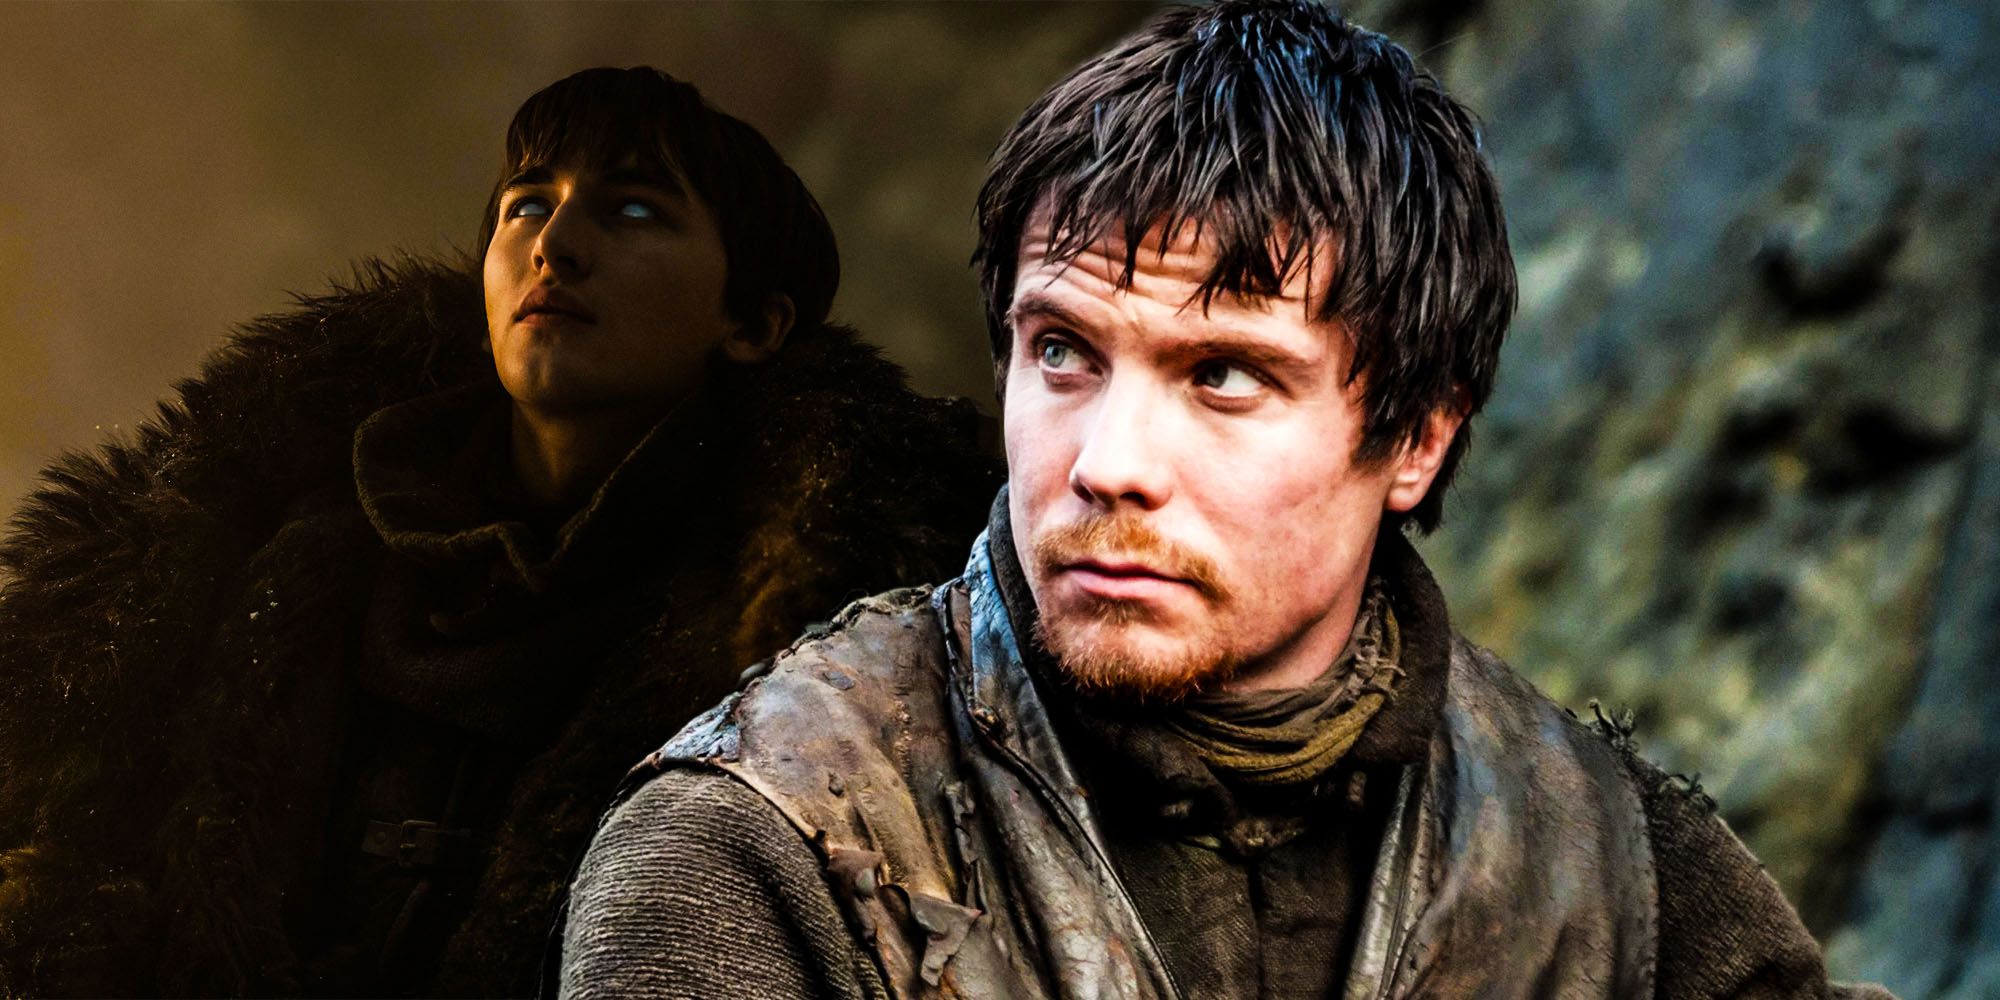 Game of thrones king gendry wouldve been better for westeros than Bran